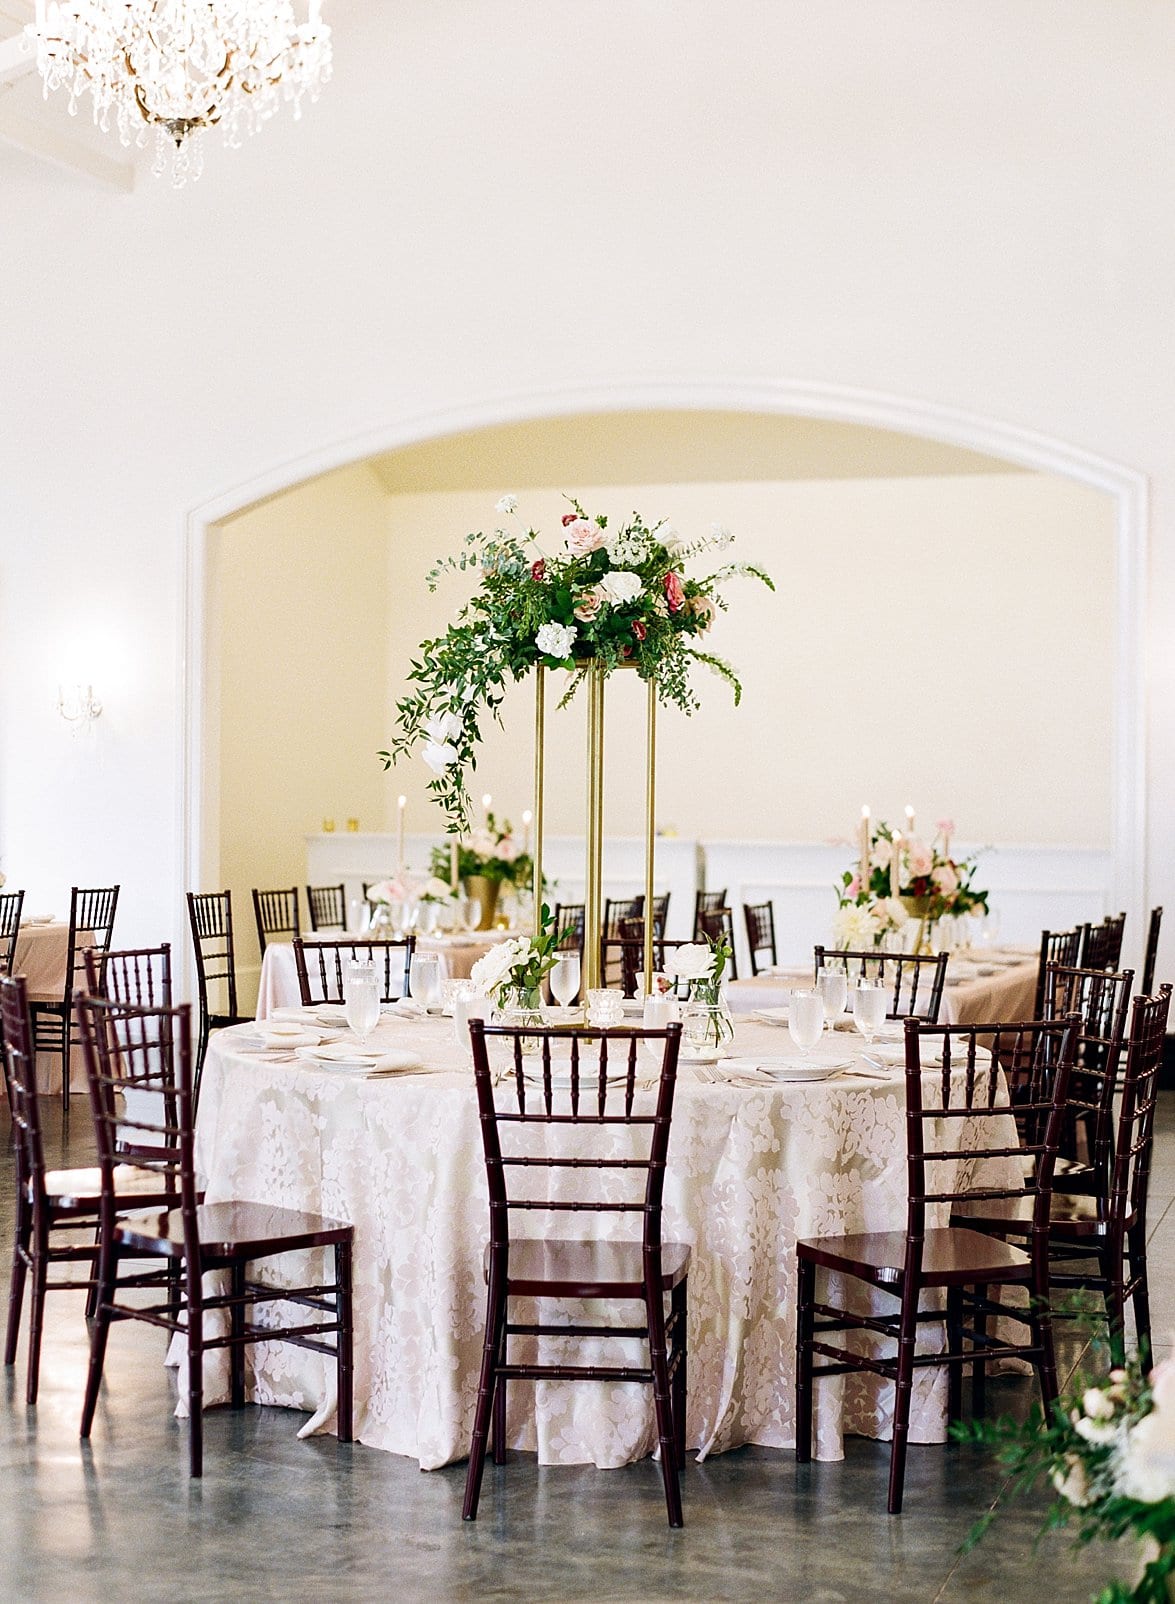 Merrimon Wynne round wedding reception tables with tall floral center piece arrangements with greenery hanging down photo